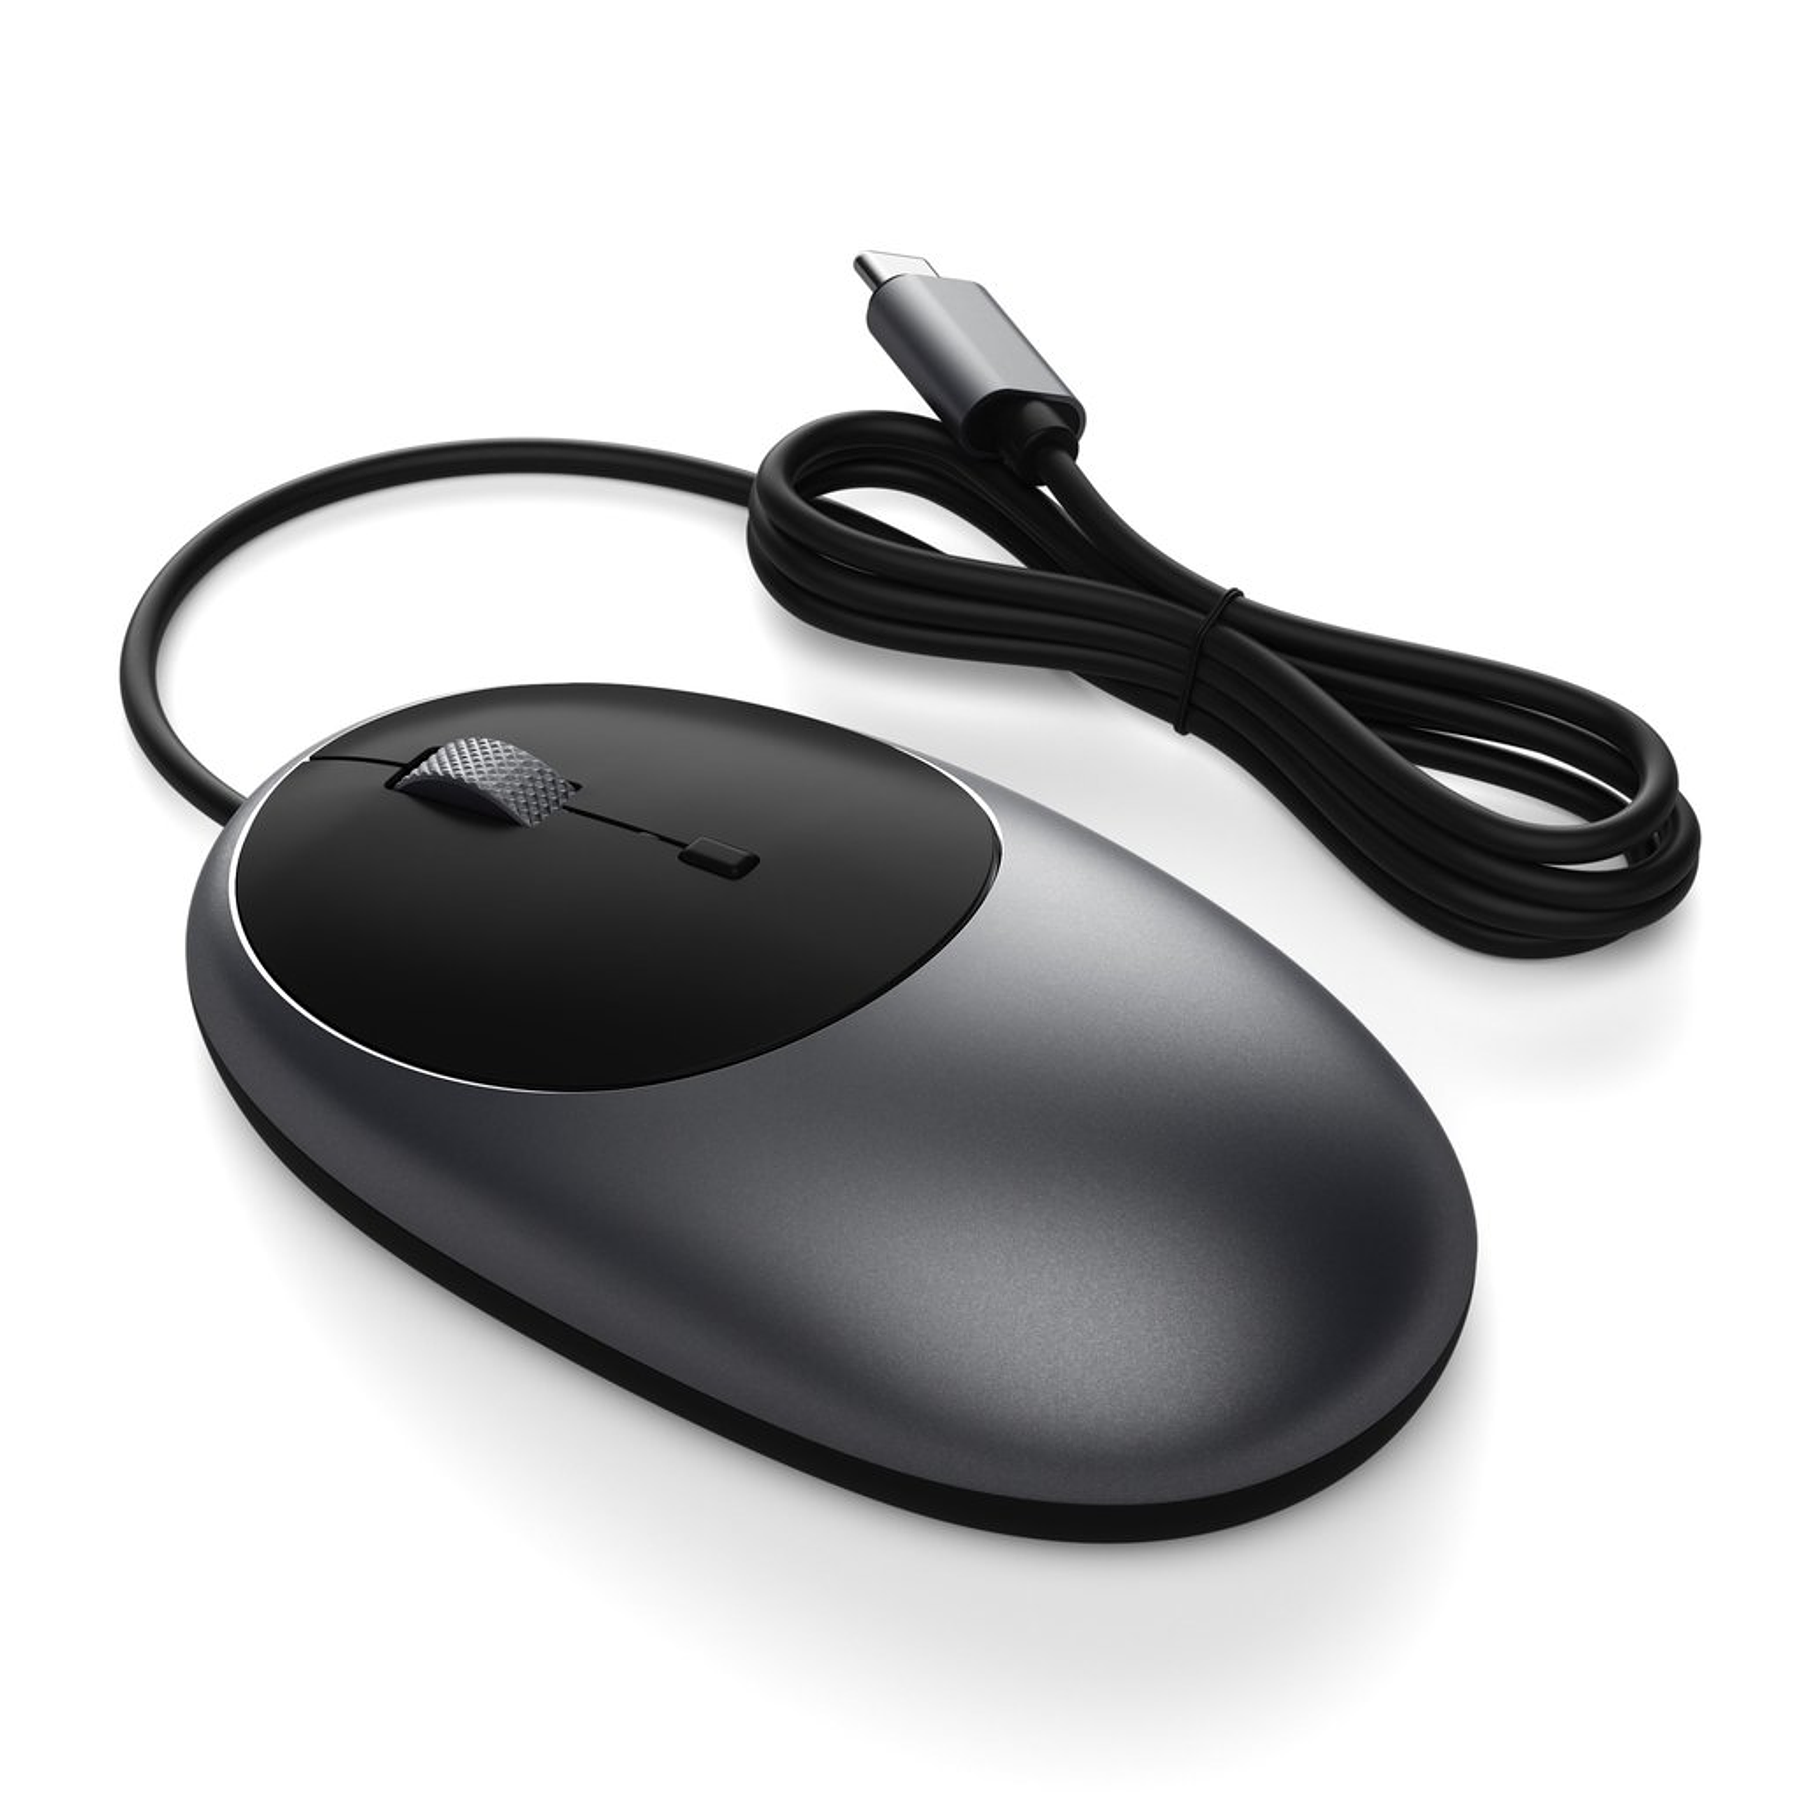 Satechi - C1 USB-C Wired Mouse (space grey)   